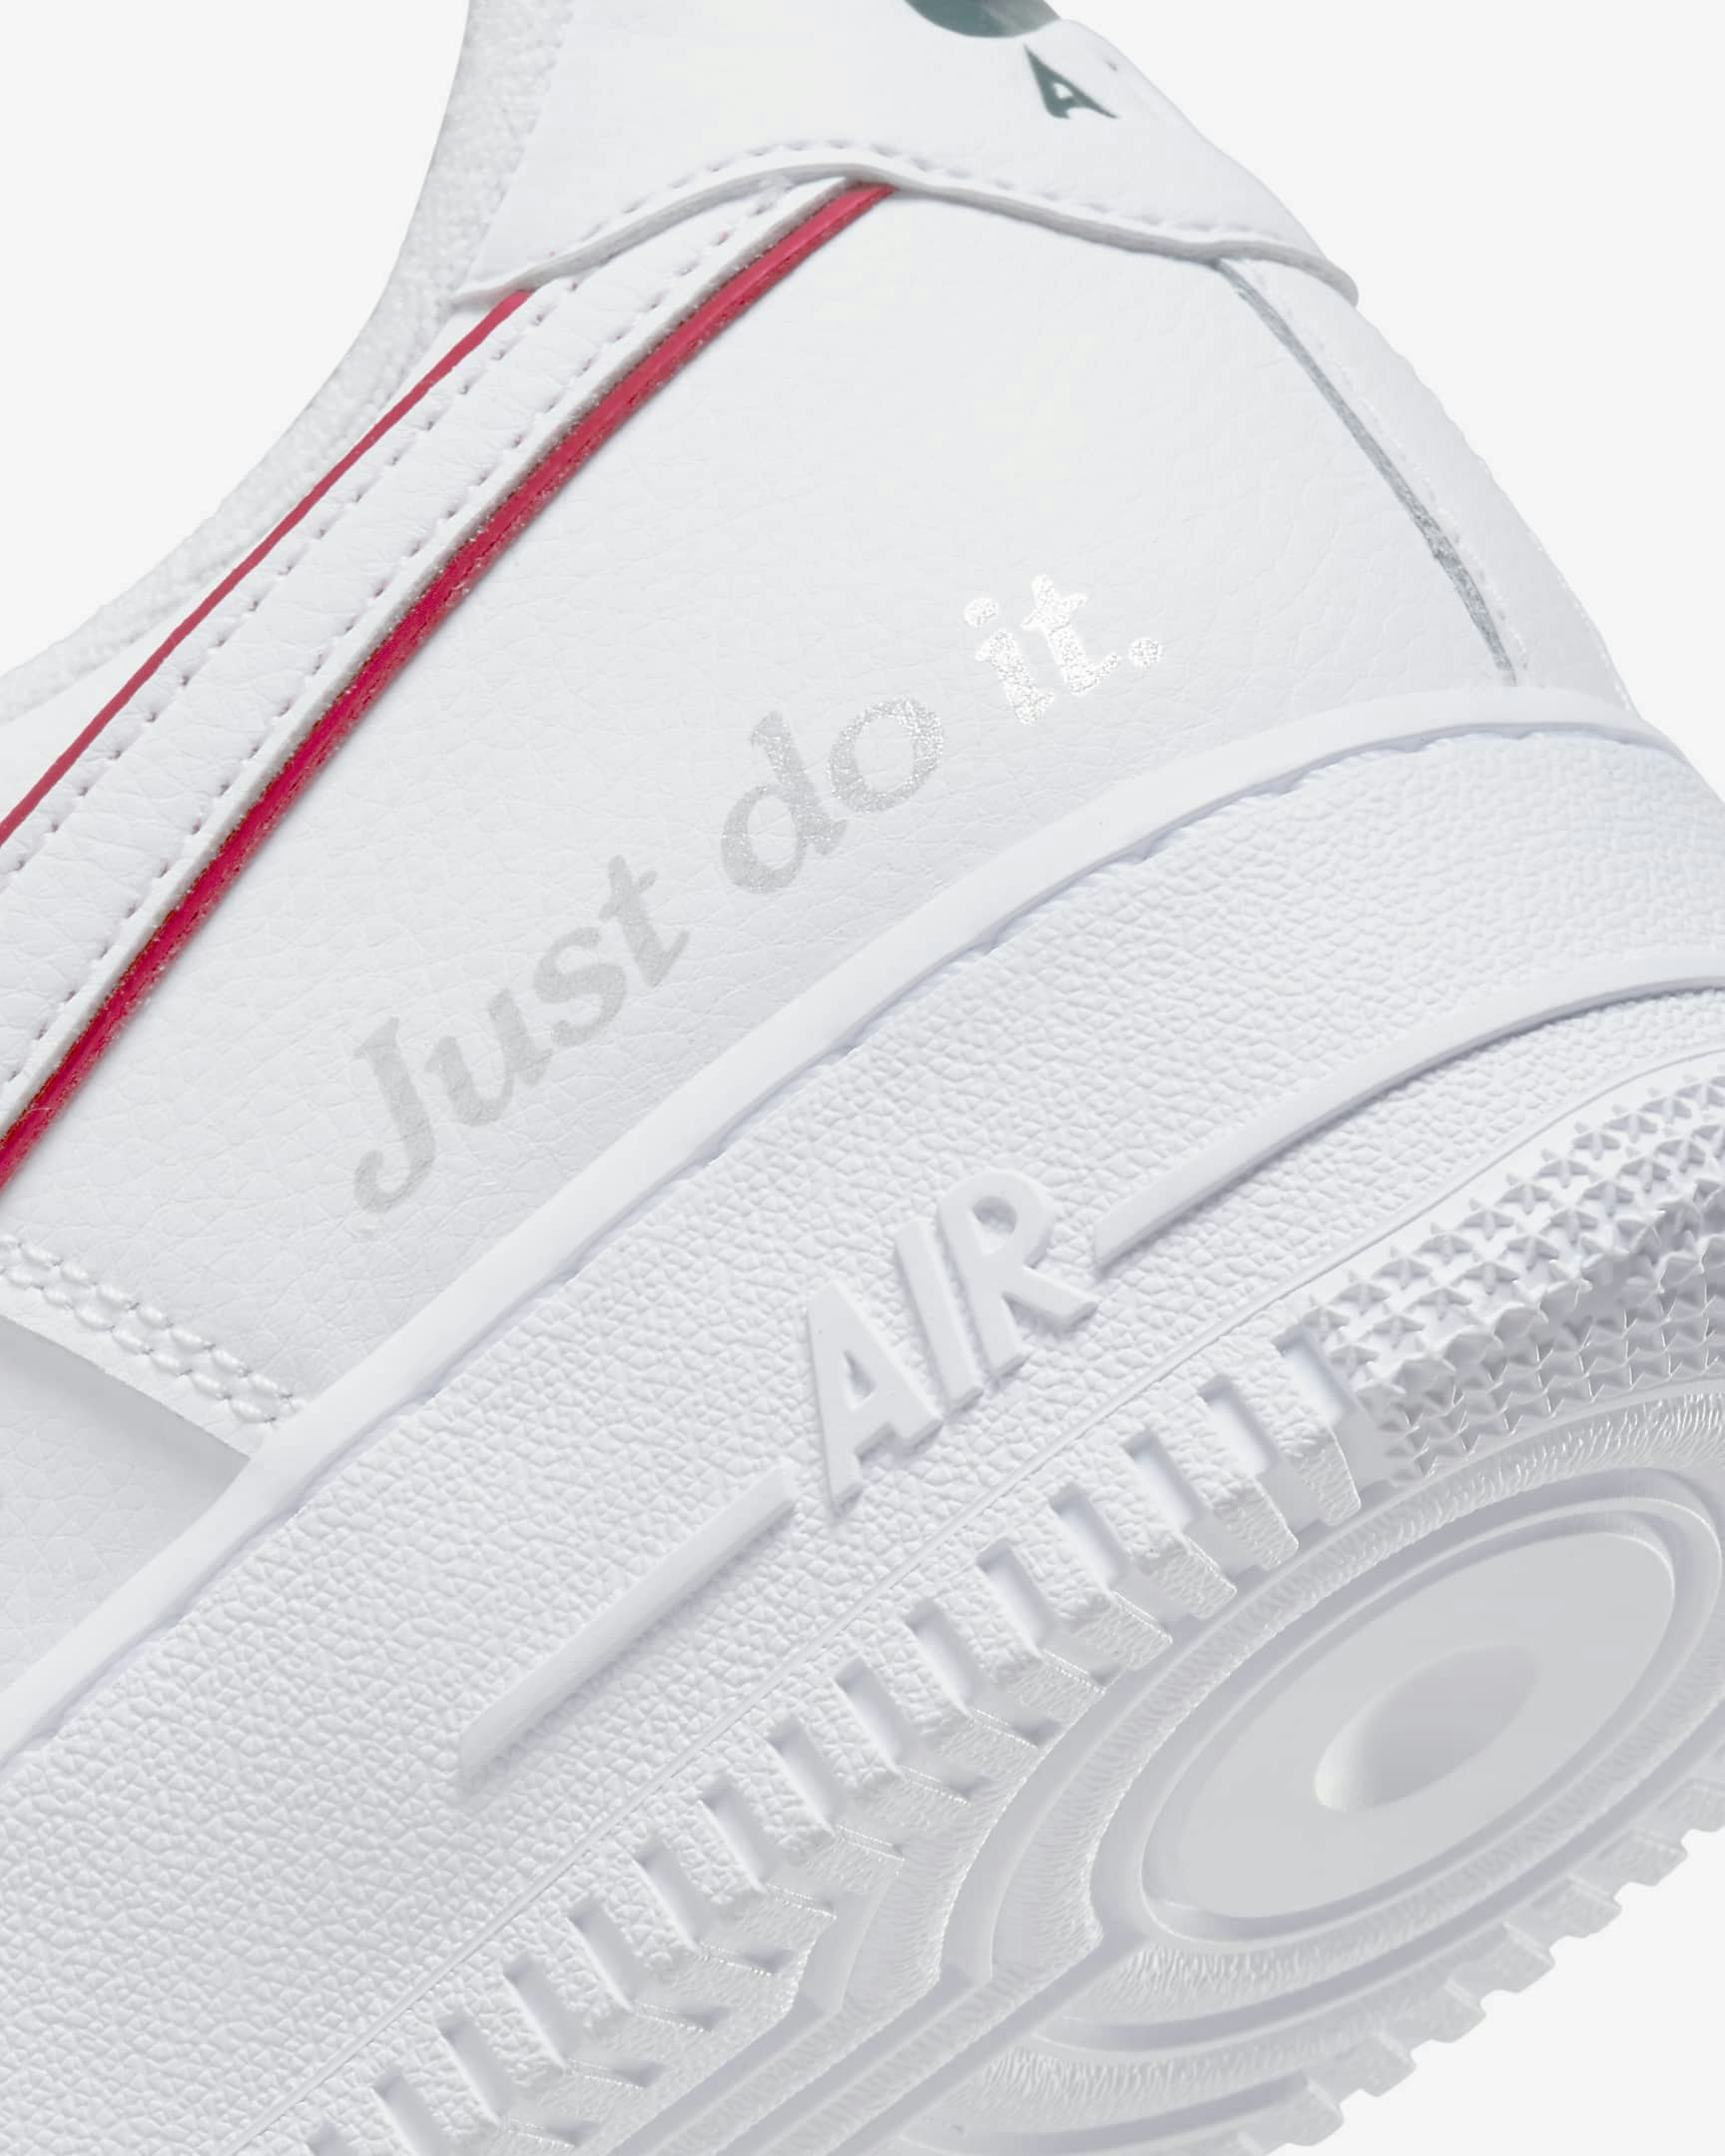 Nike Air Force 1 Low "Just Do It" (Metallic Silver)